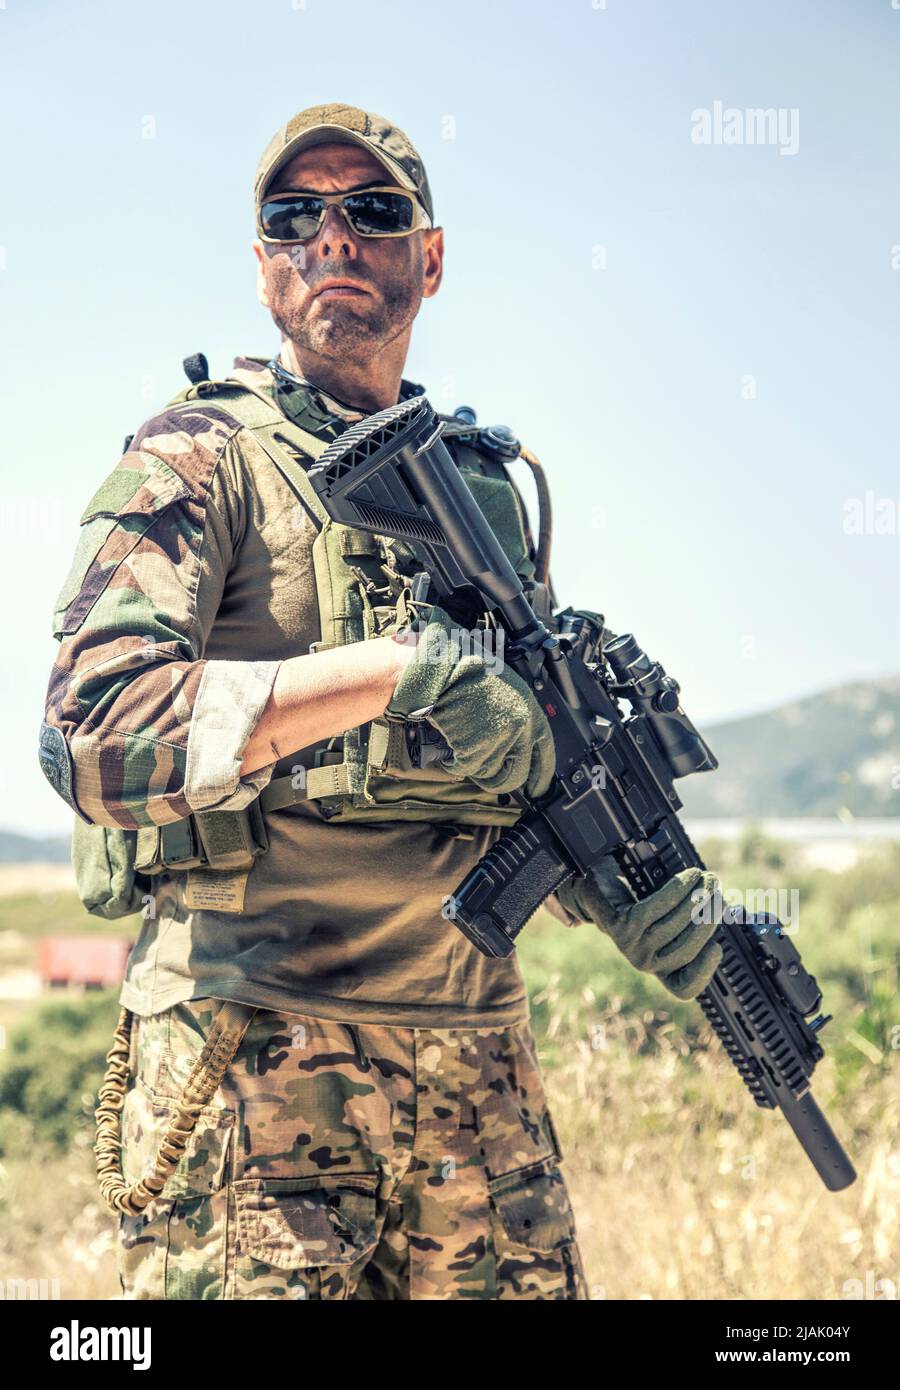 Half-length portrait of an armed Navy SEALs fighter wearing ballistic goggles while standing outdoors. Stock Photo